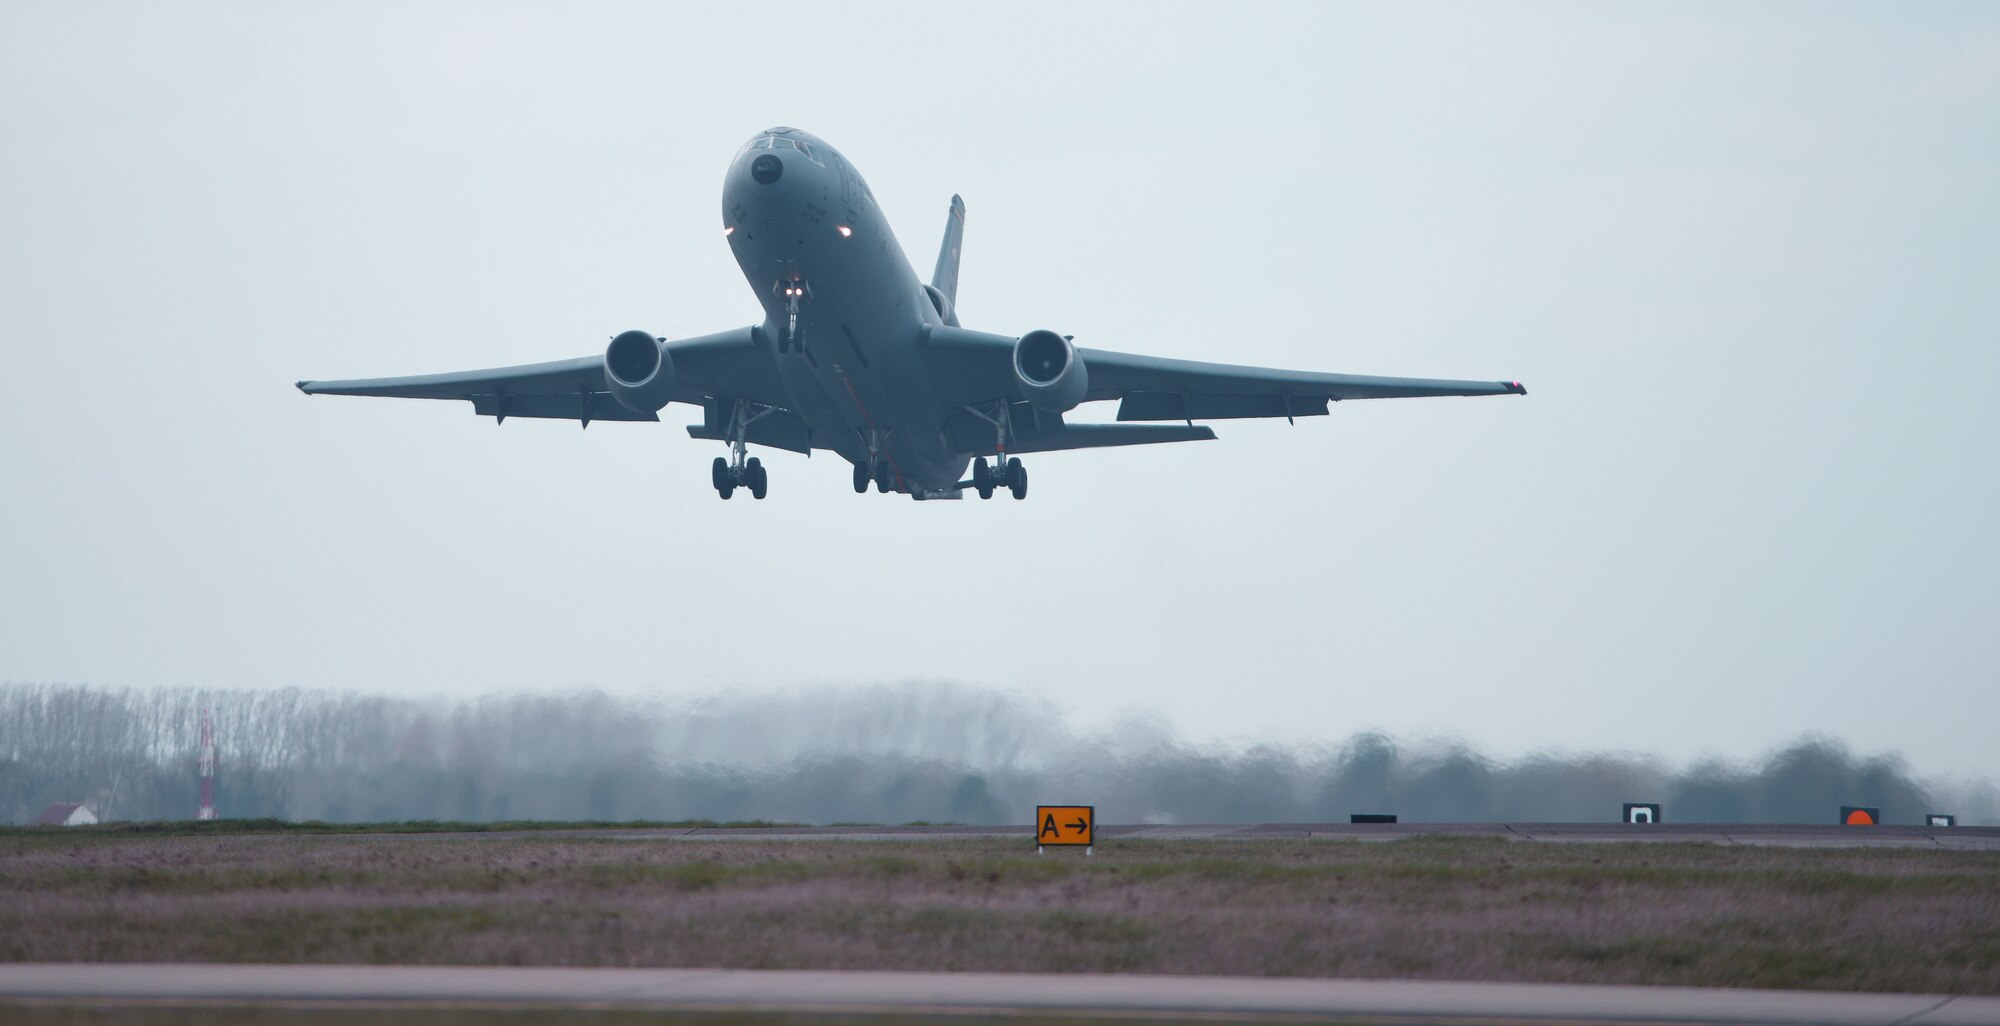 A U.S. Air Force KC-10 Extender aircraft assigned to the 305th Air Mobility Wing, Joint Base McGuire-Dix-Lakehurst, N.J., takes off from Royal Air Force Mildenhall, England, March 9, 2022. The KC-10 is an Air Mobility Command advanced tanker and cargo aircraft designed to provide increased global mobility for U.S. Armed Forces. (U.S. Air Force photo by Karen Abeyasekere)